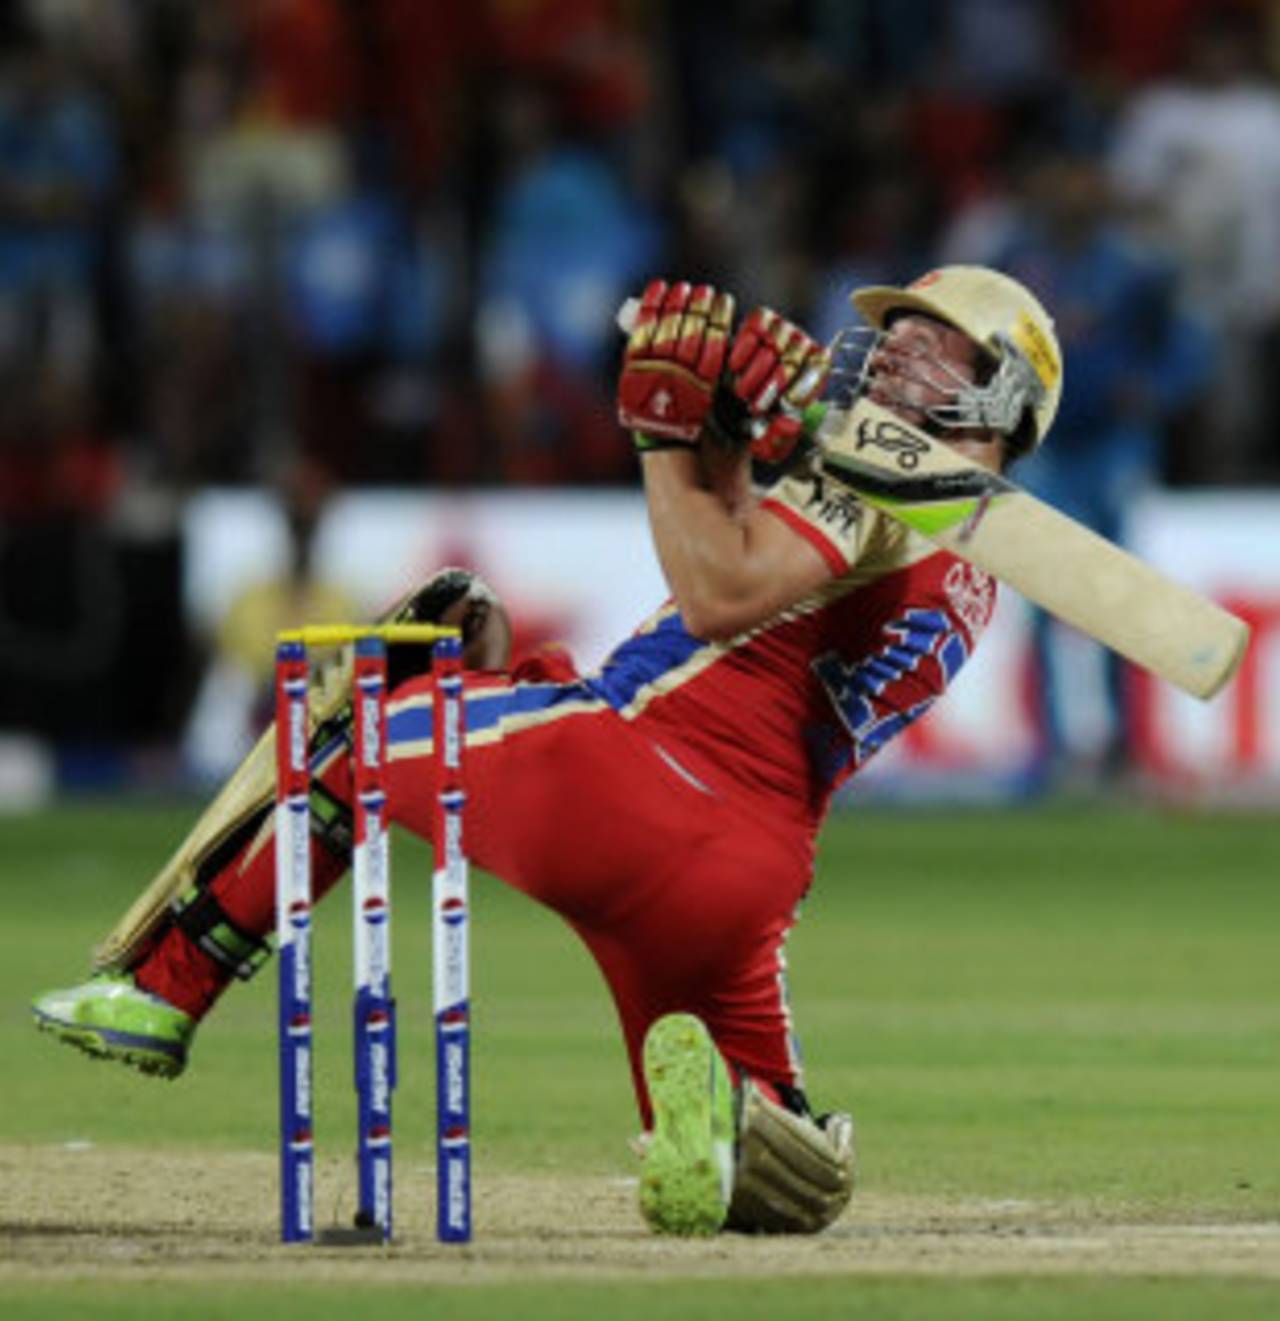 AB de Villiers played some outrageous strokes, Pune Warriors v Royal Challengers Bangalore, IPL 2013, Pune, May 2, 2013